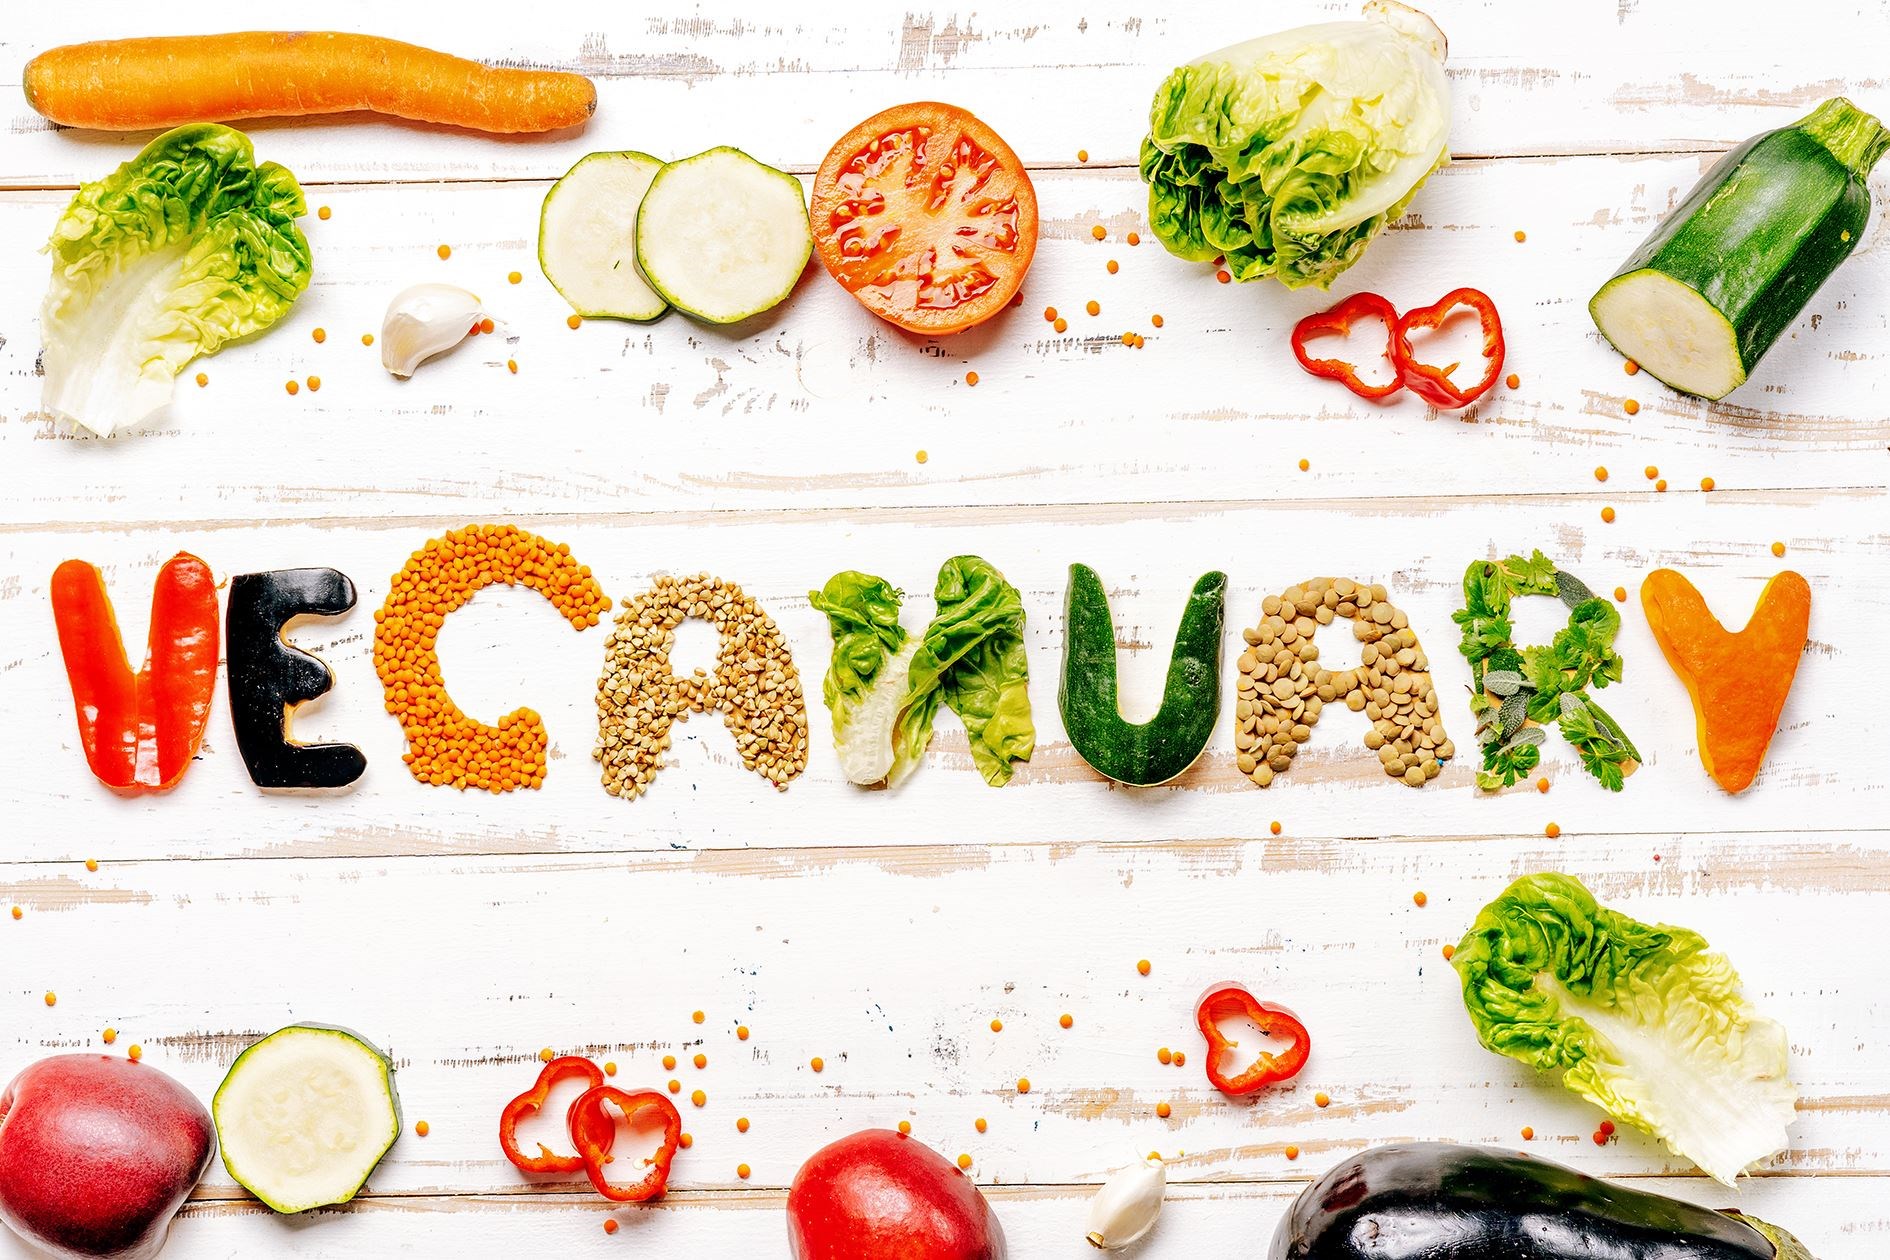 Figures show Veganuary didn't have the same impact this year.